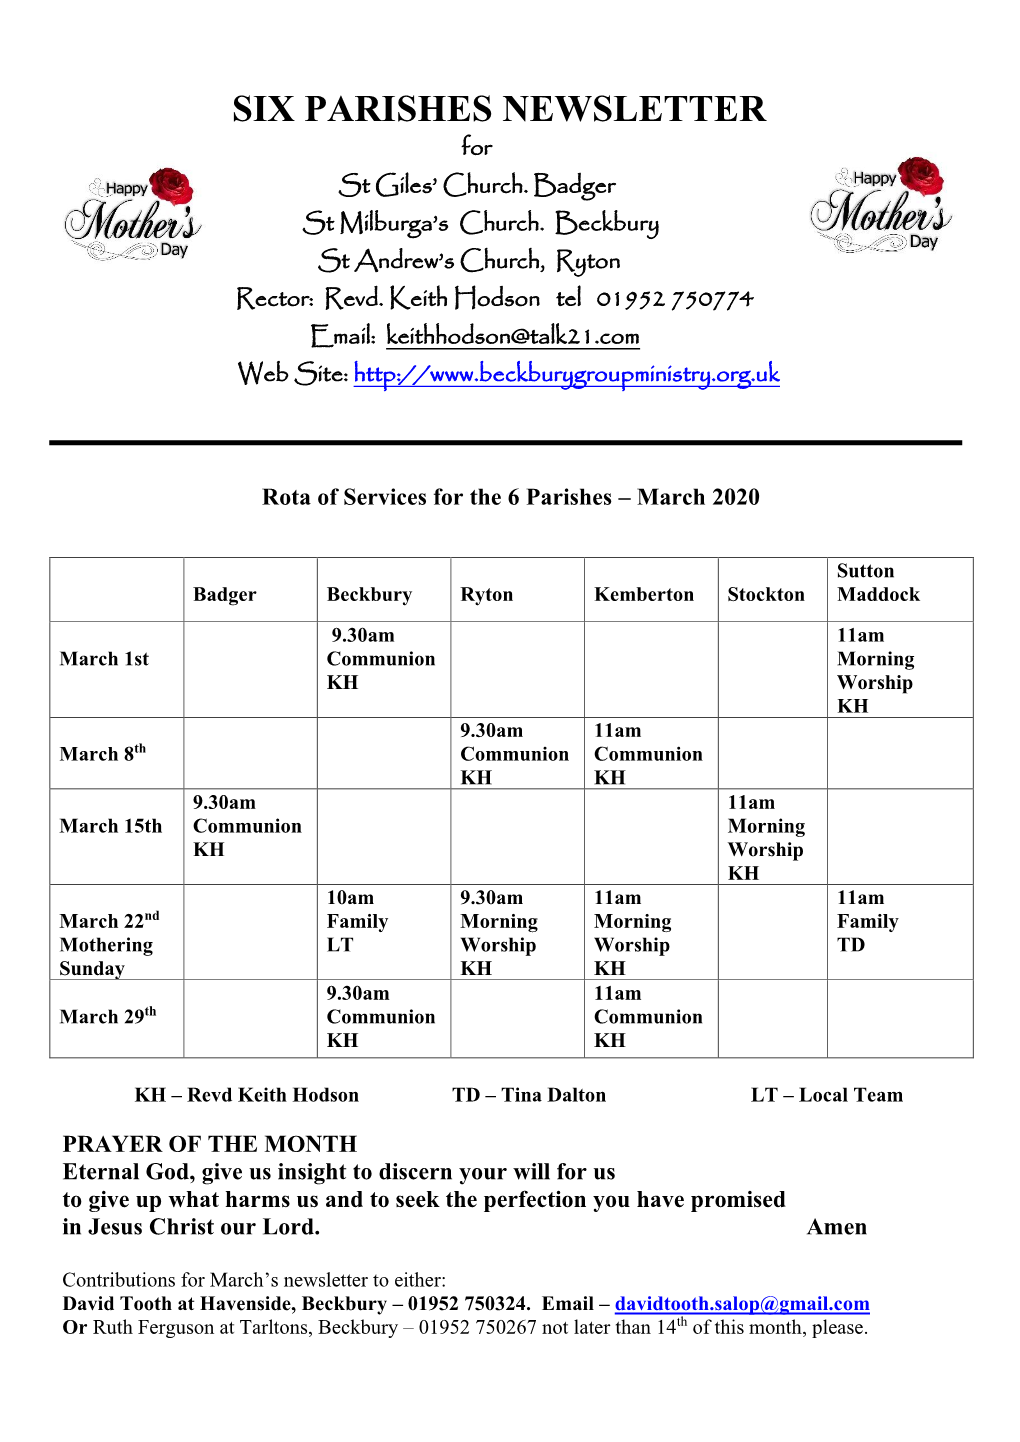 SIX PARISHES NEWSLETTER for St Giles’ Church